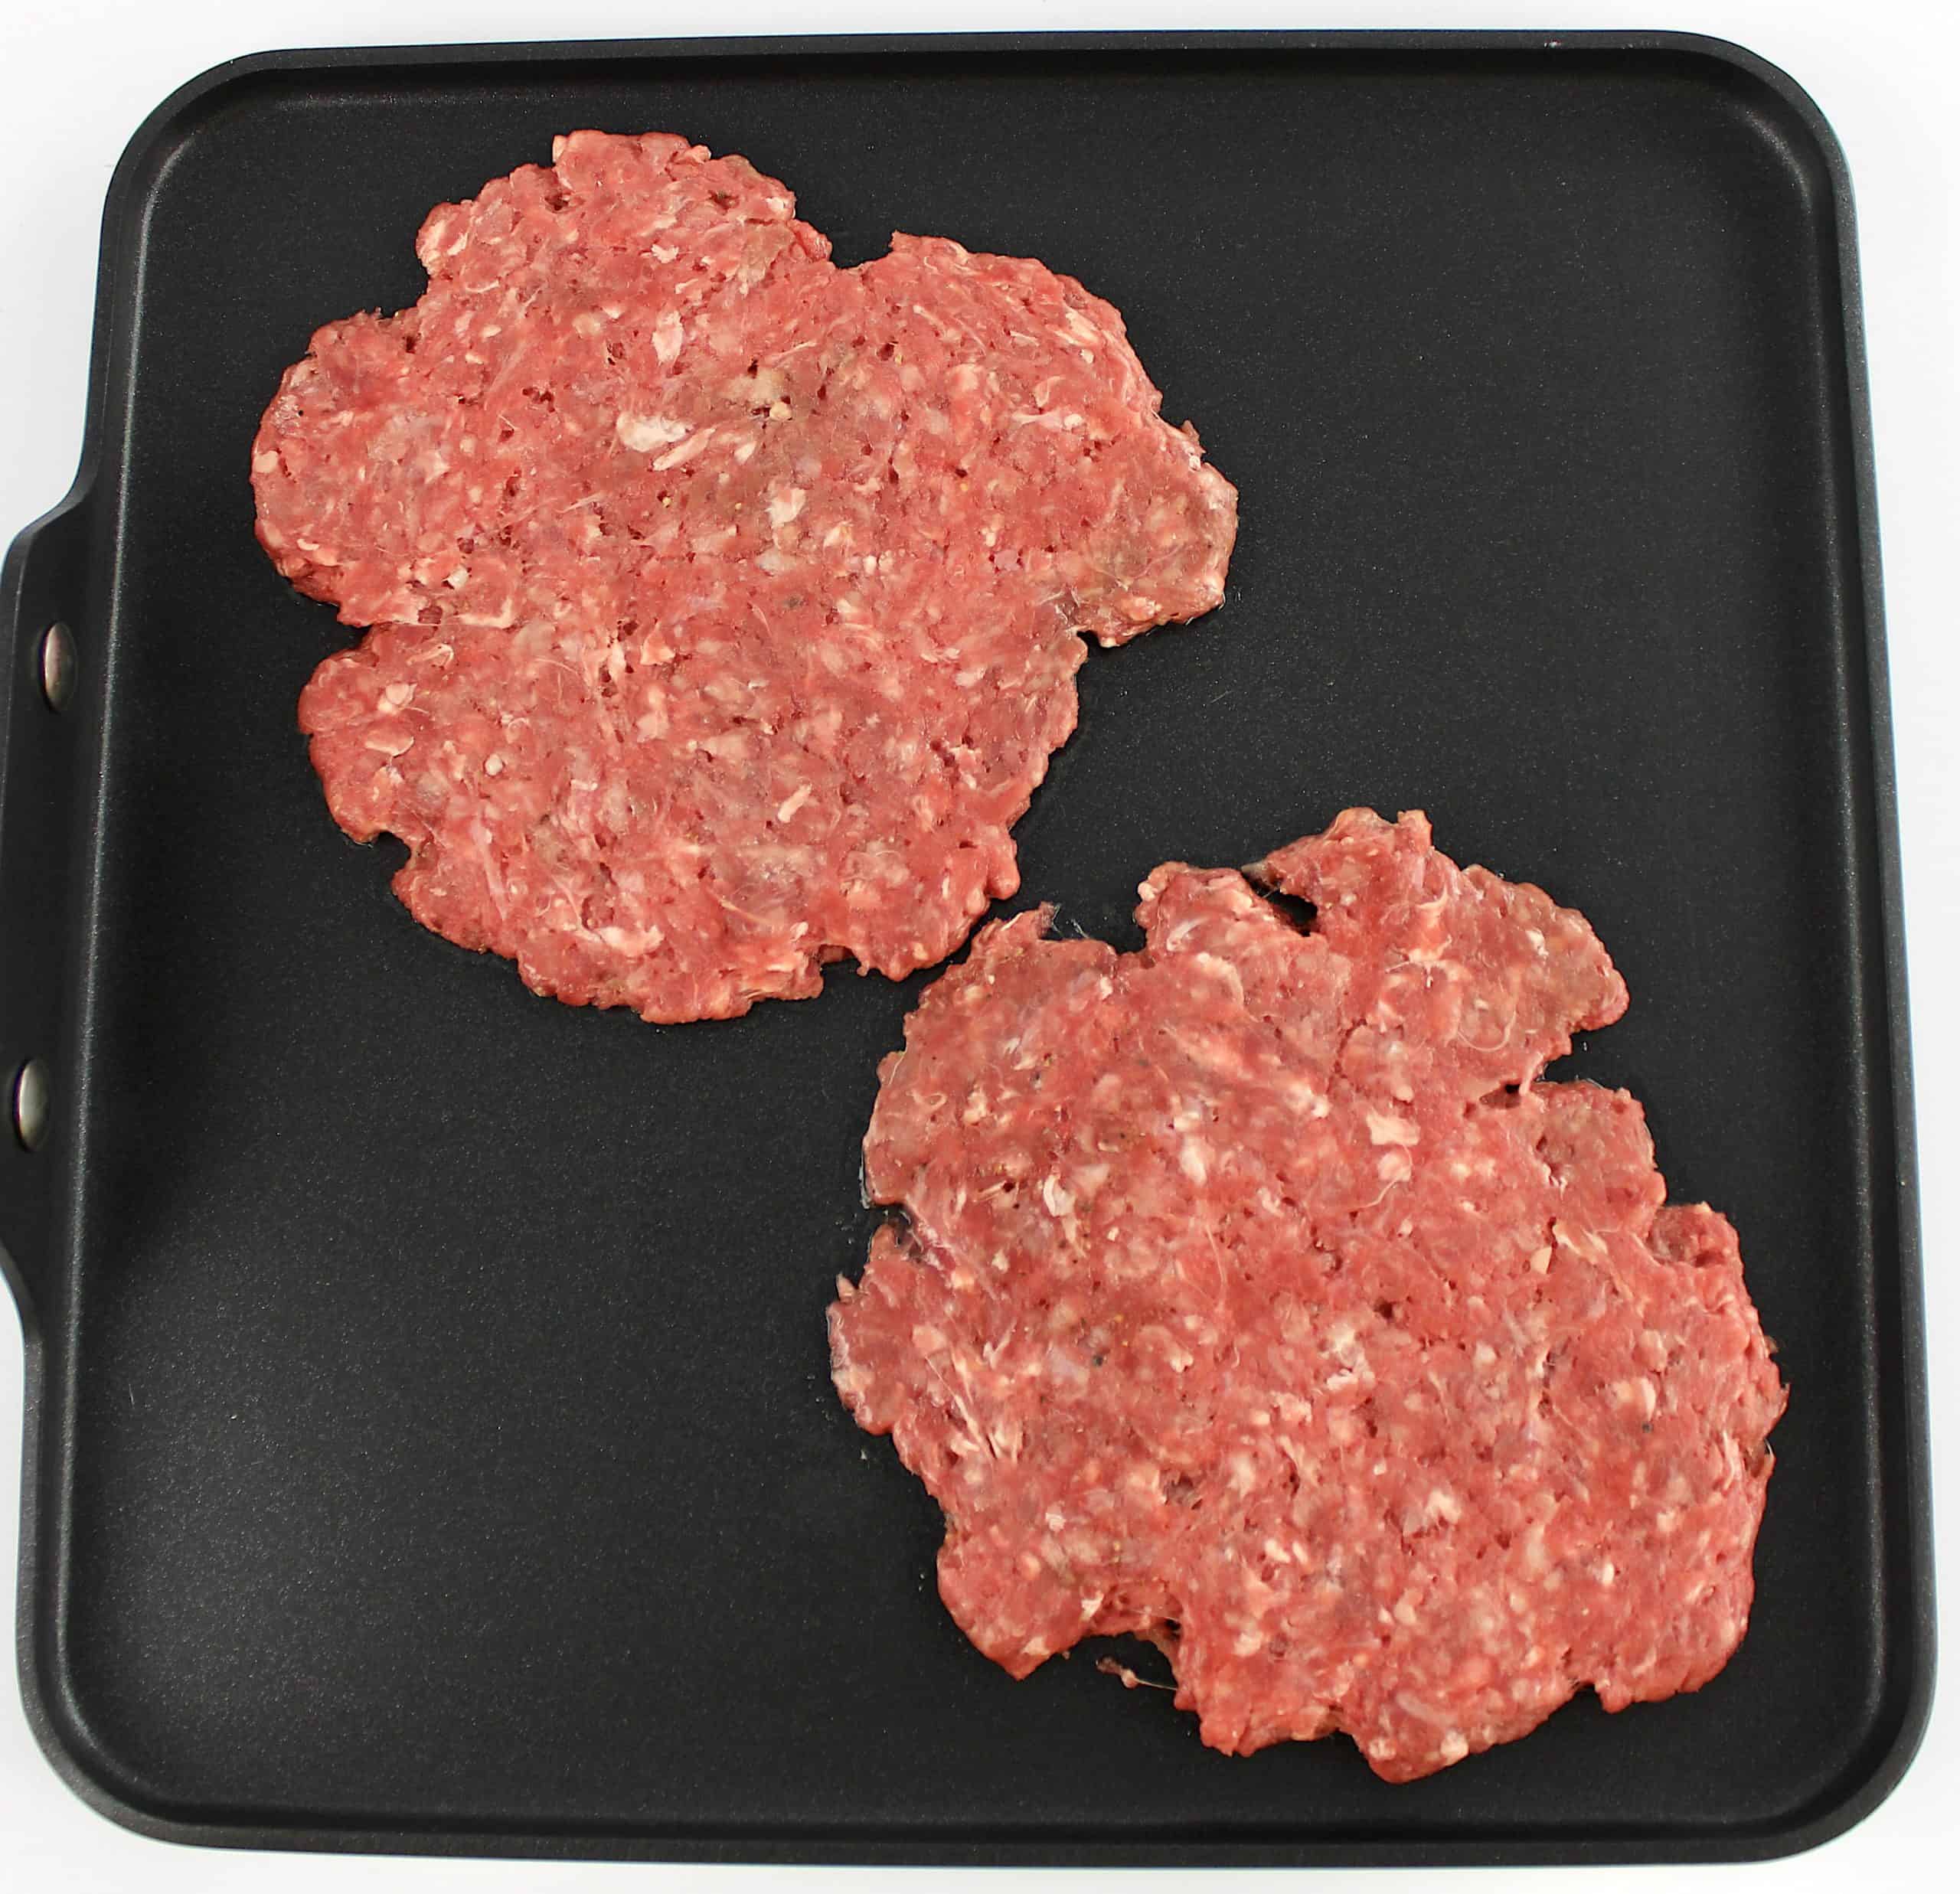 2 smash burgers raw on griddle